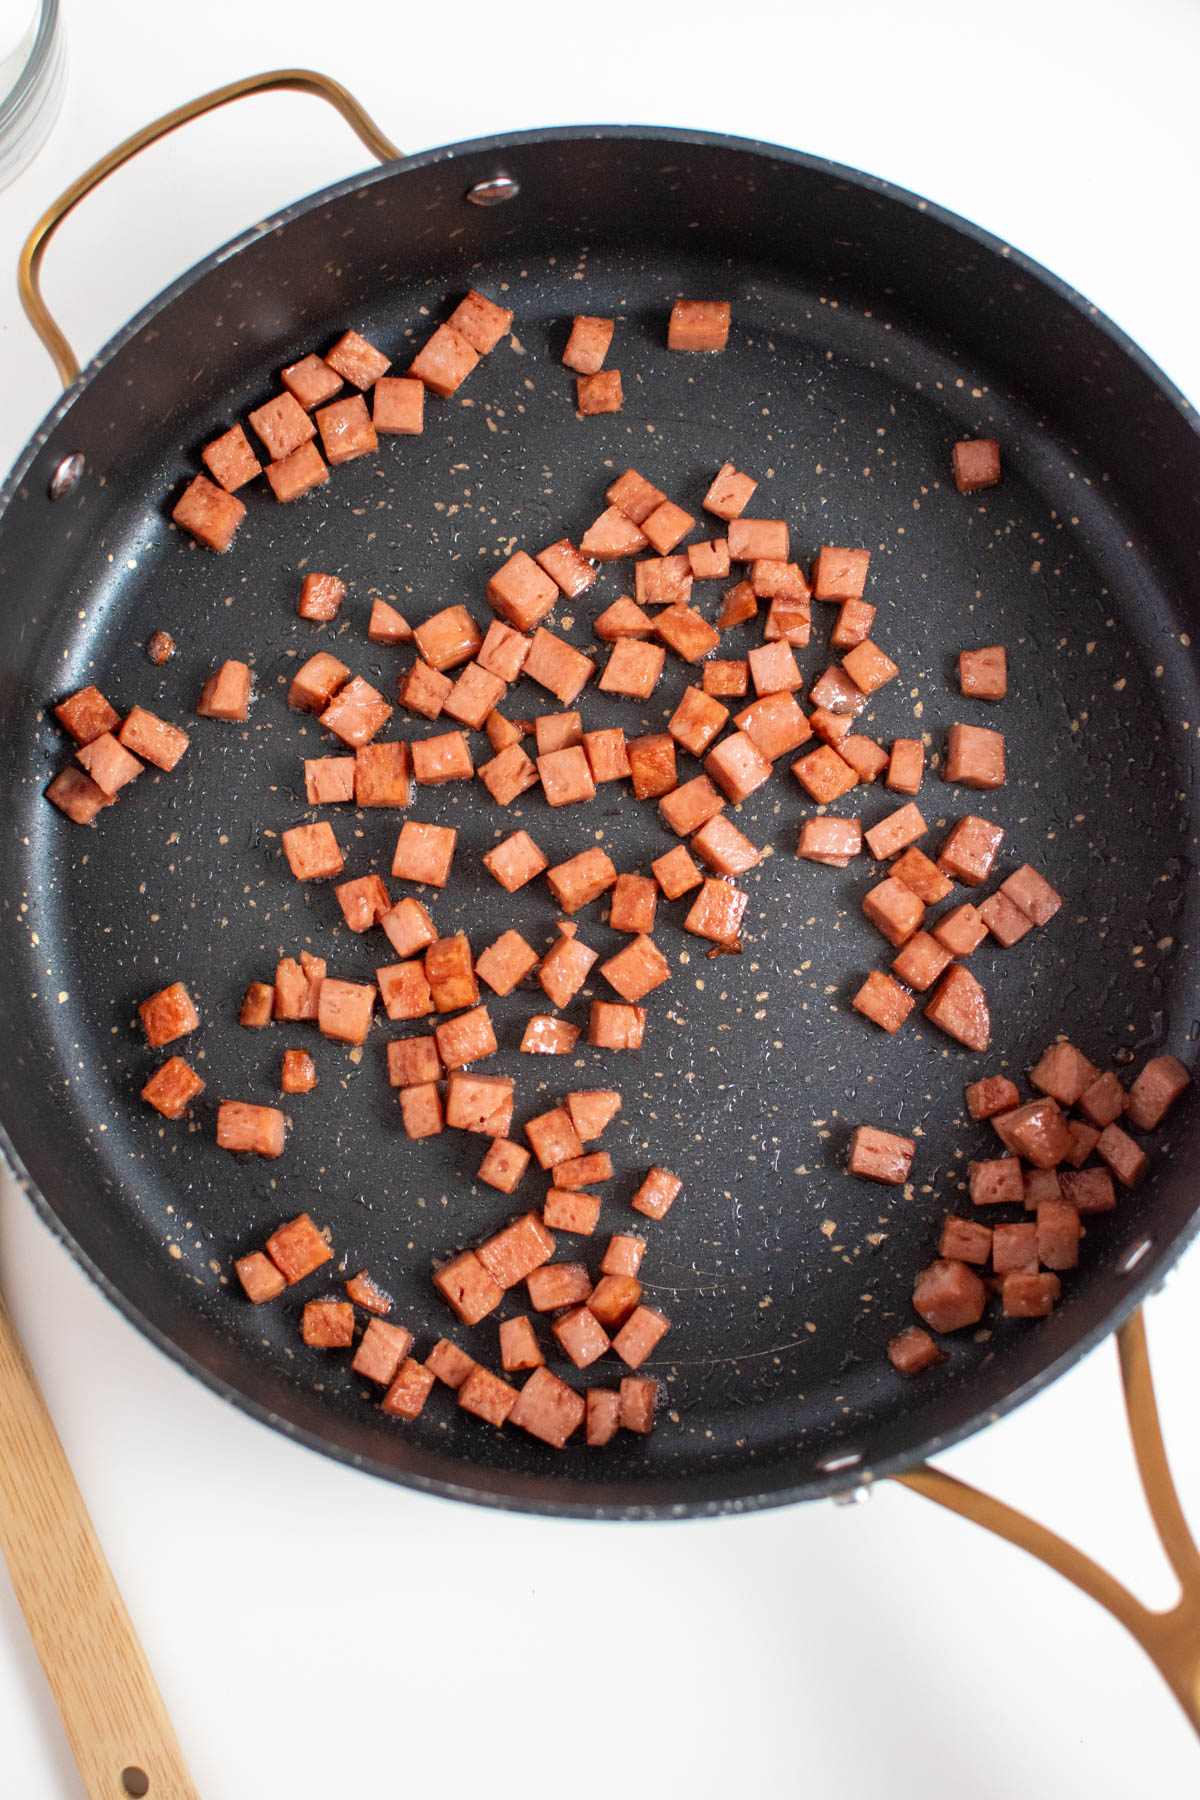 Several small fried Spam pieces in large black skillet on white table next to wood spoon.